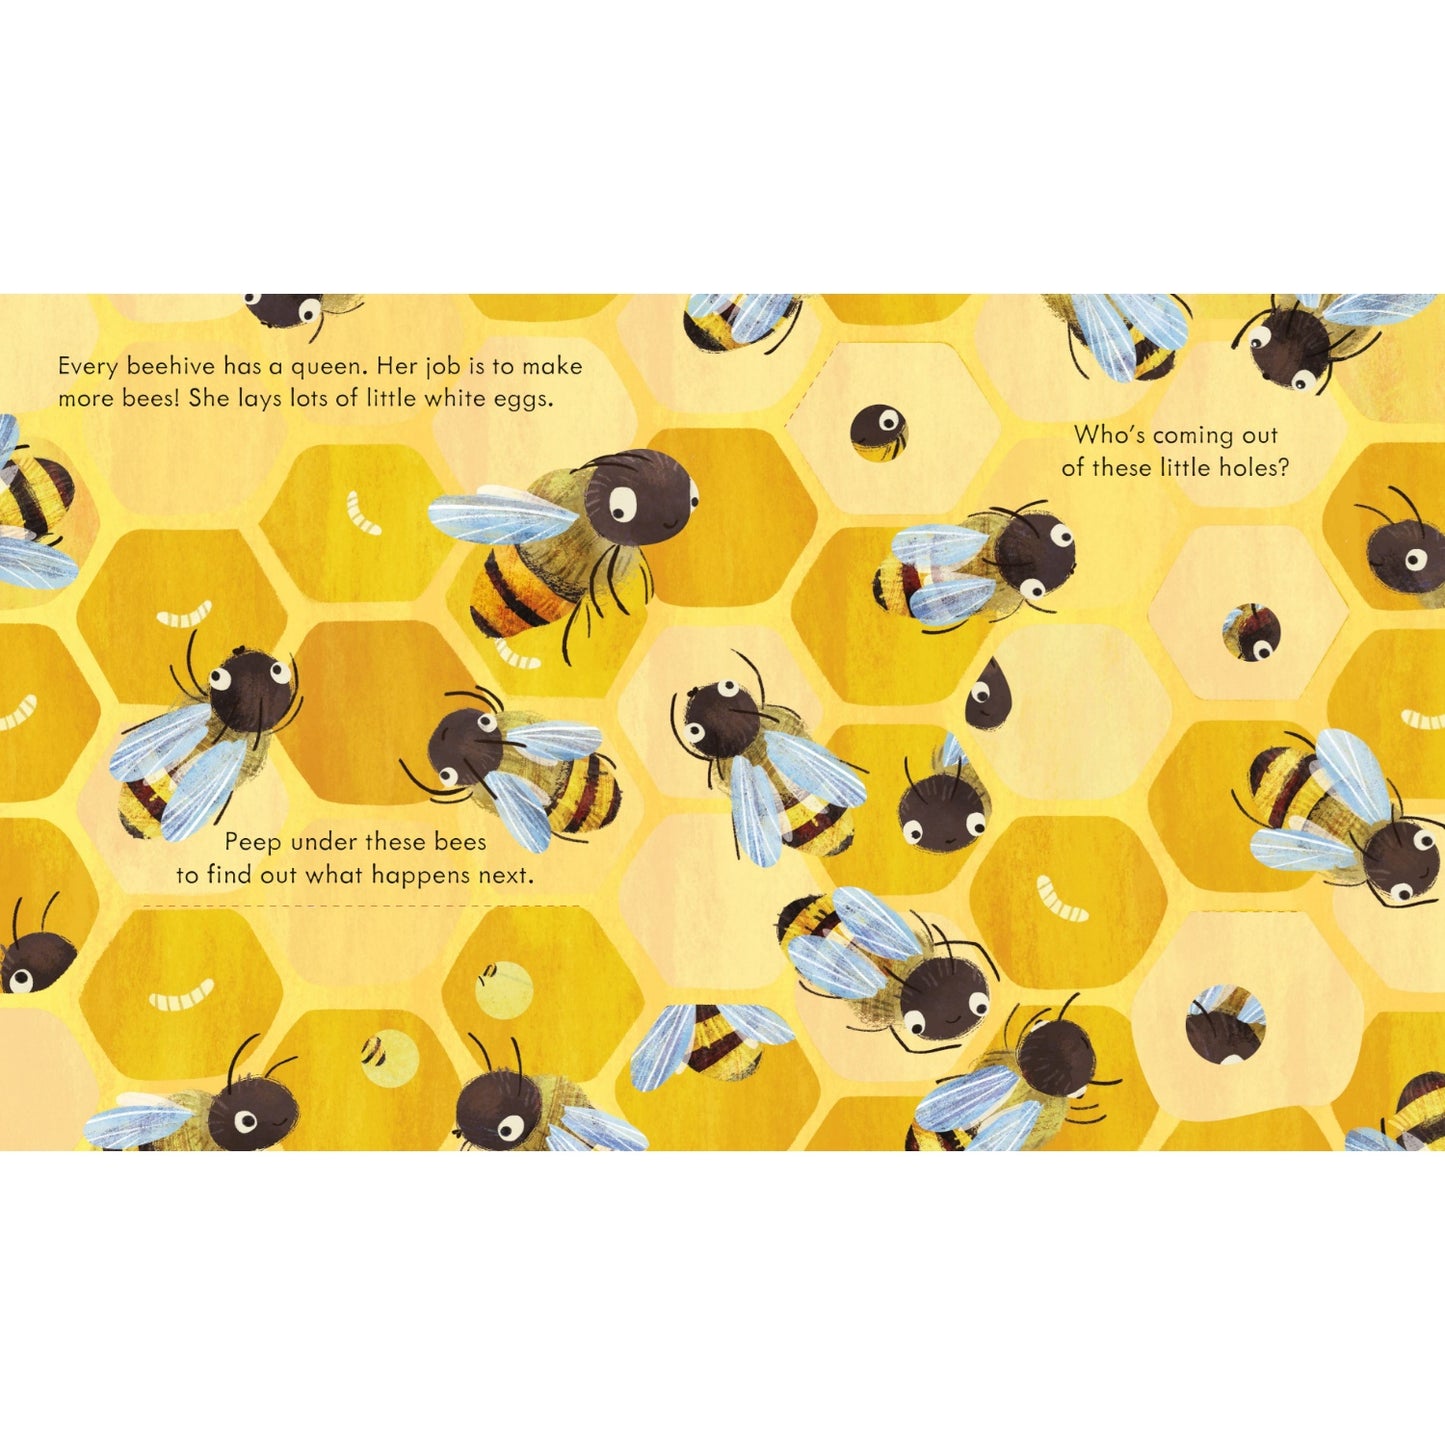 Peep Inside A Beehive | Children's Book on Bees and  Nature